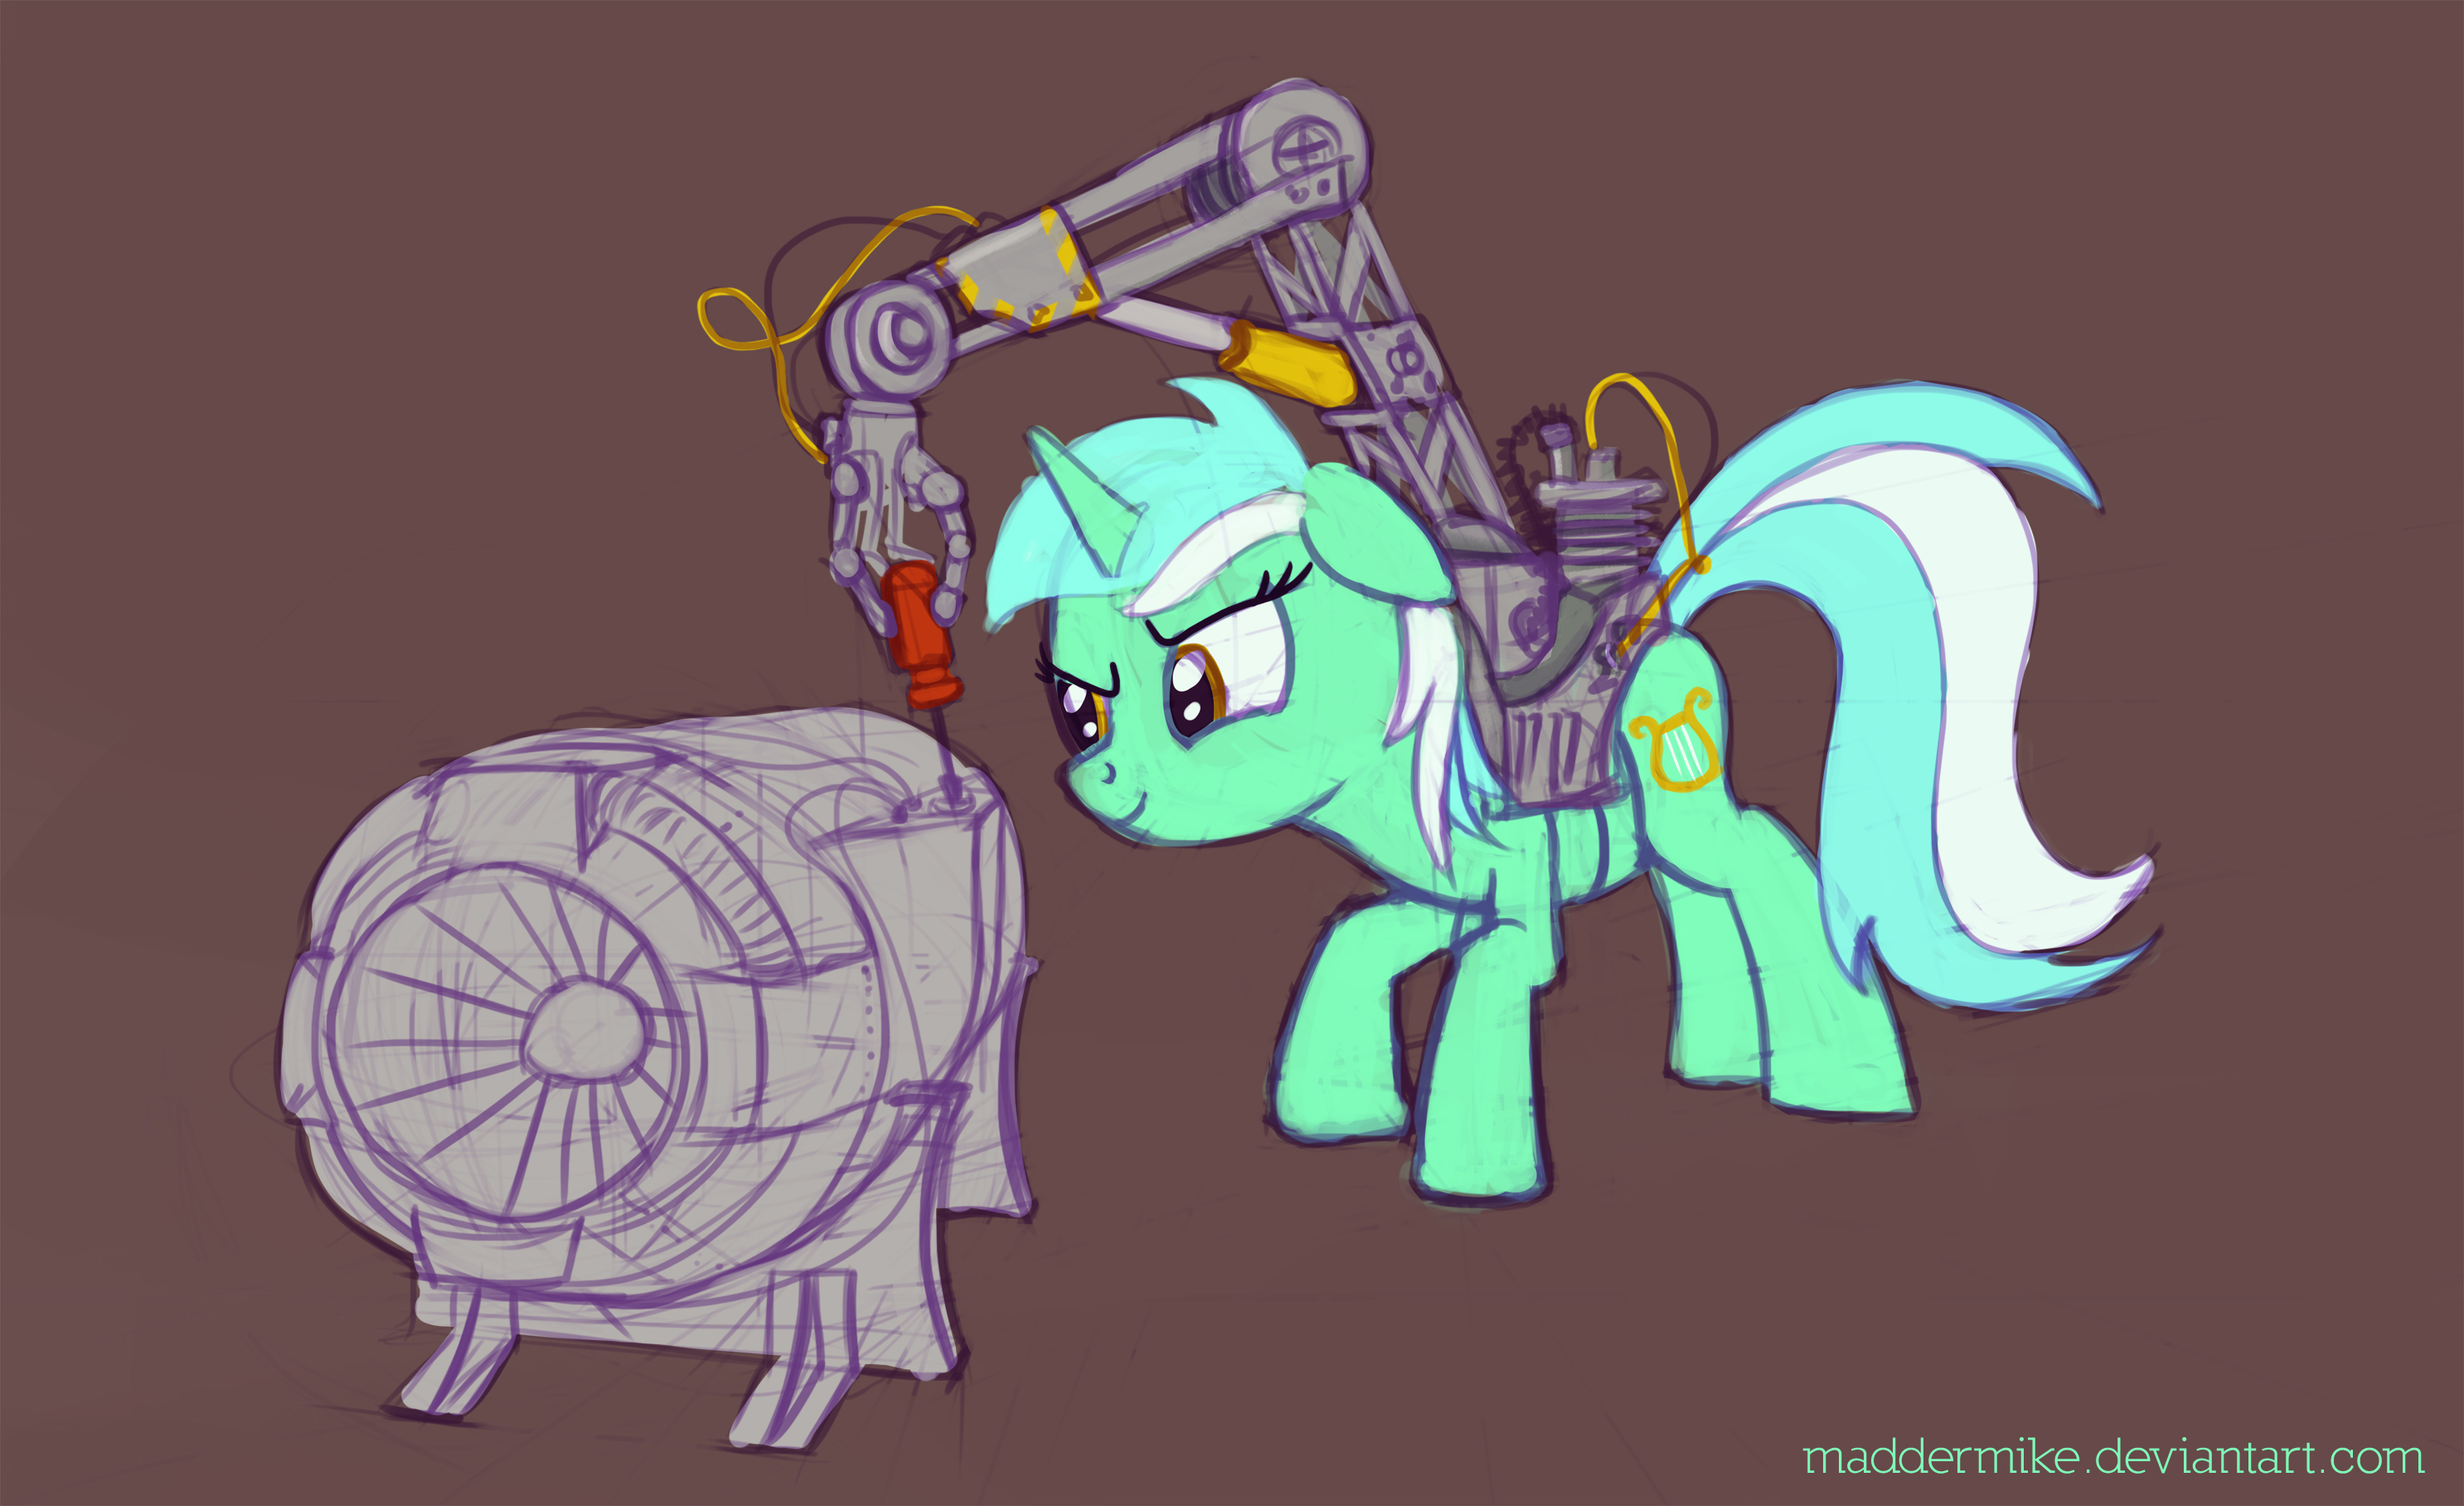 lyra_with_a_handy_tool_by_maddermike-d6i